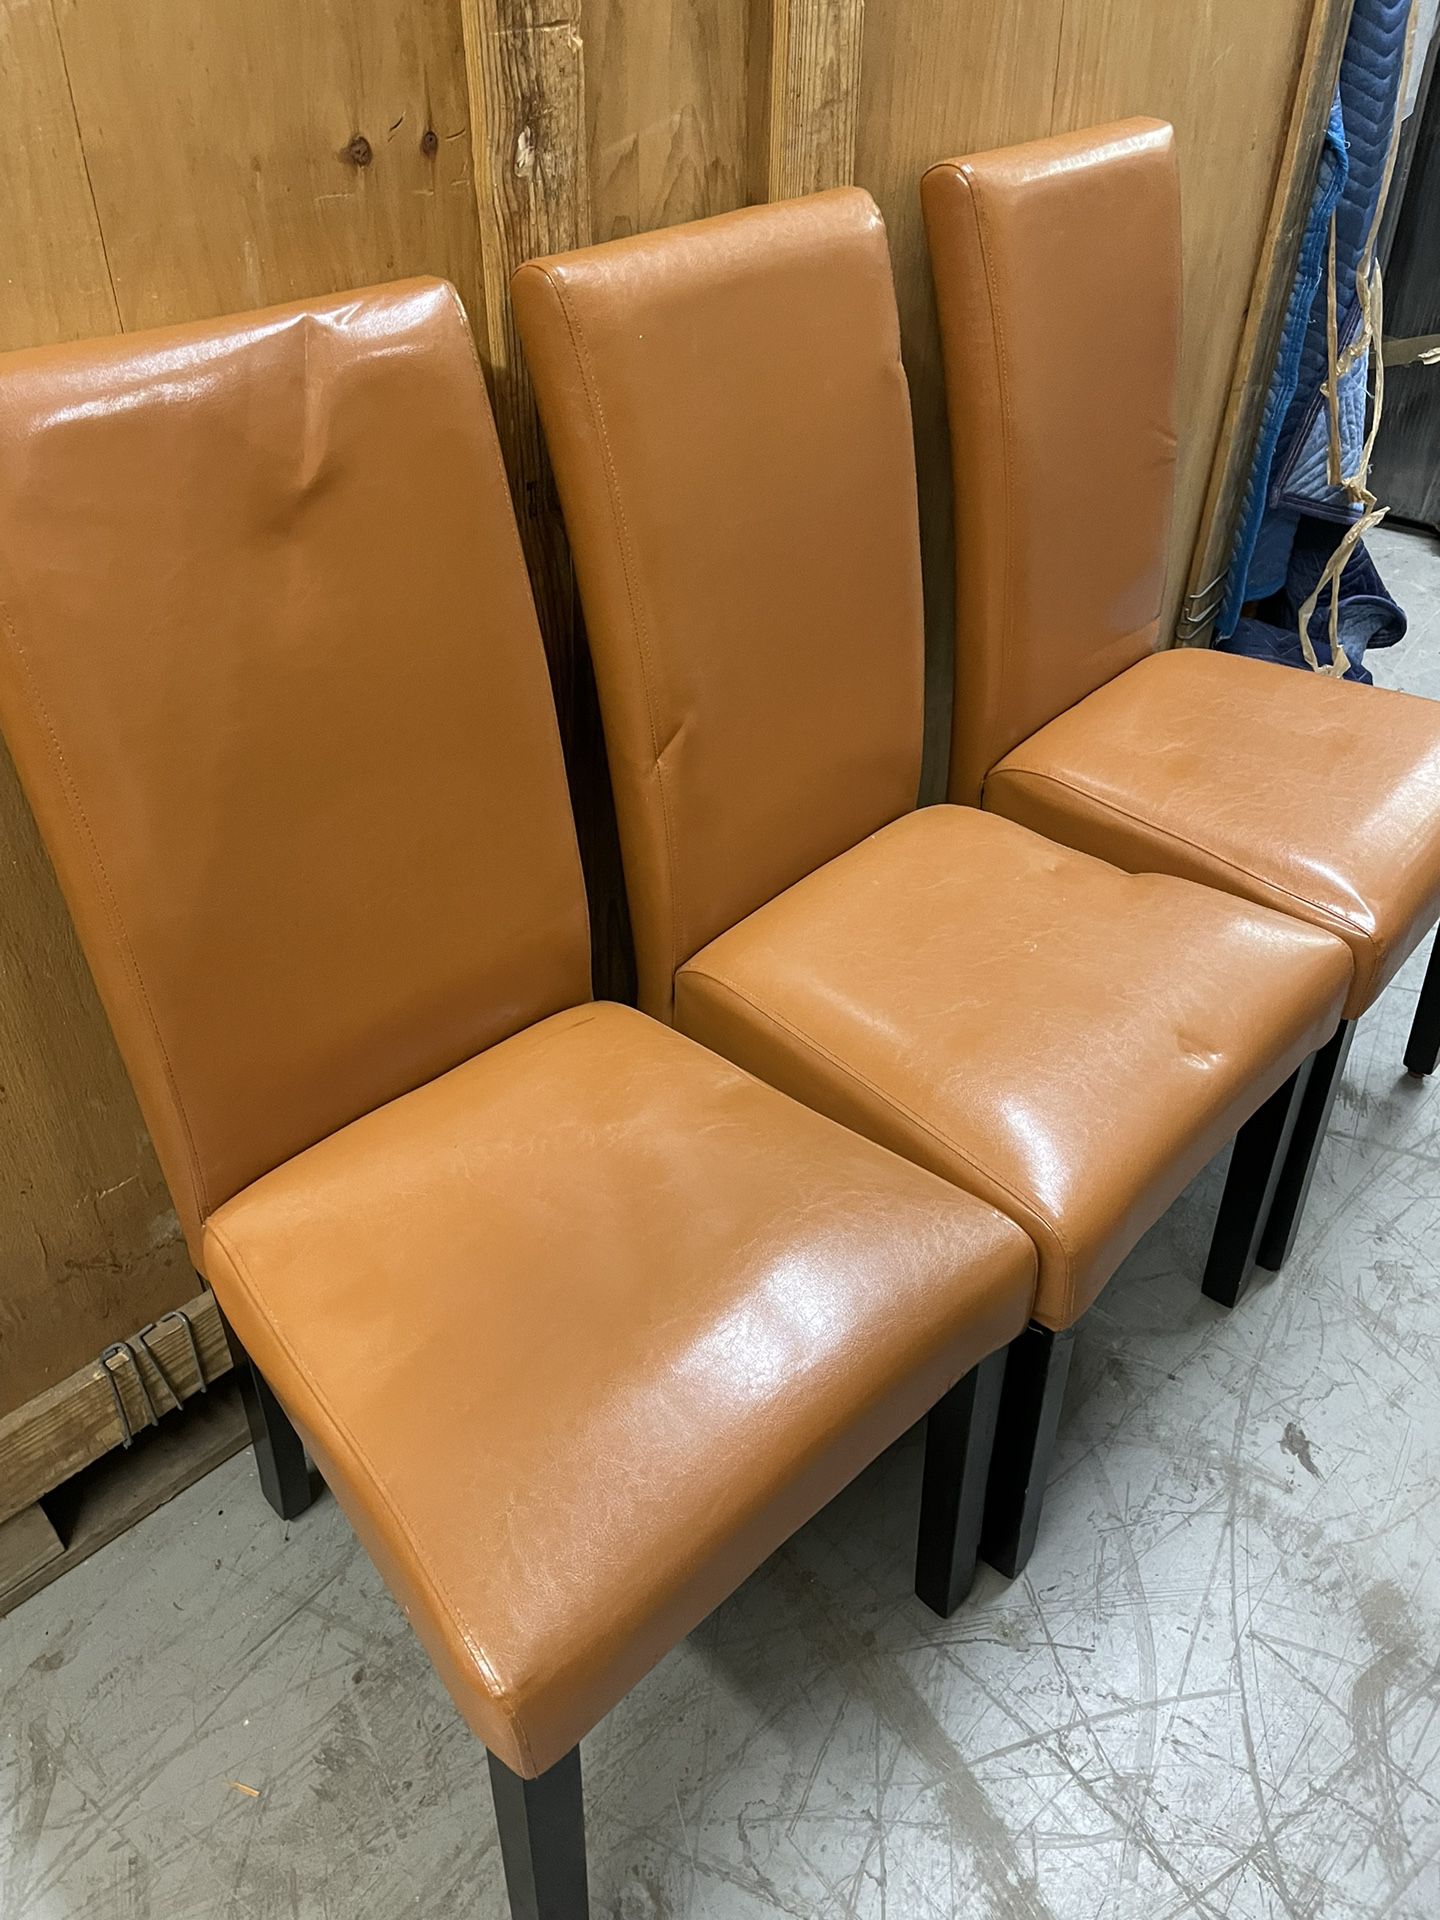 Many Chairs For Sale Price Between 20-40 Each 